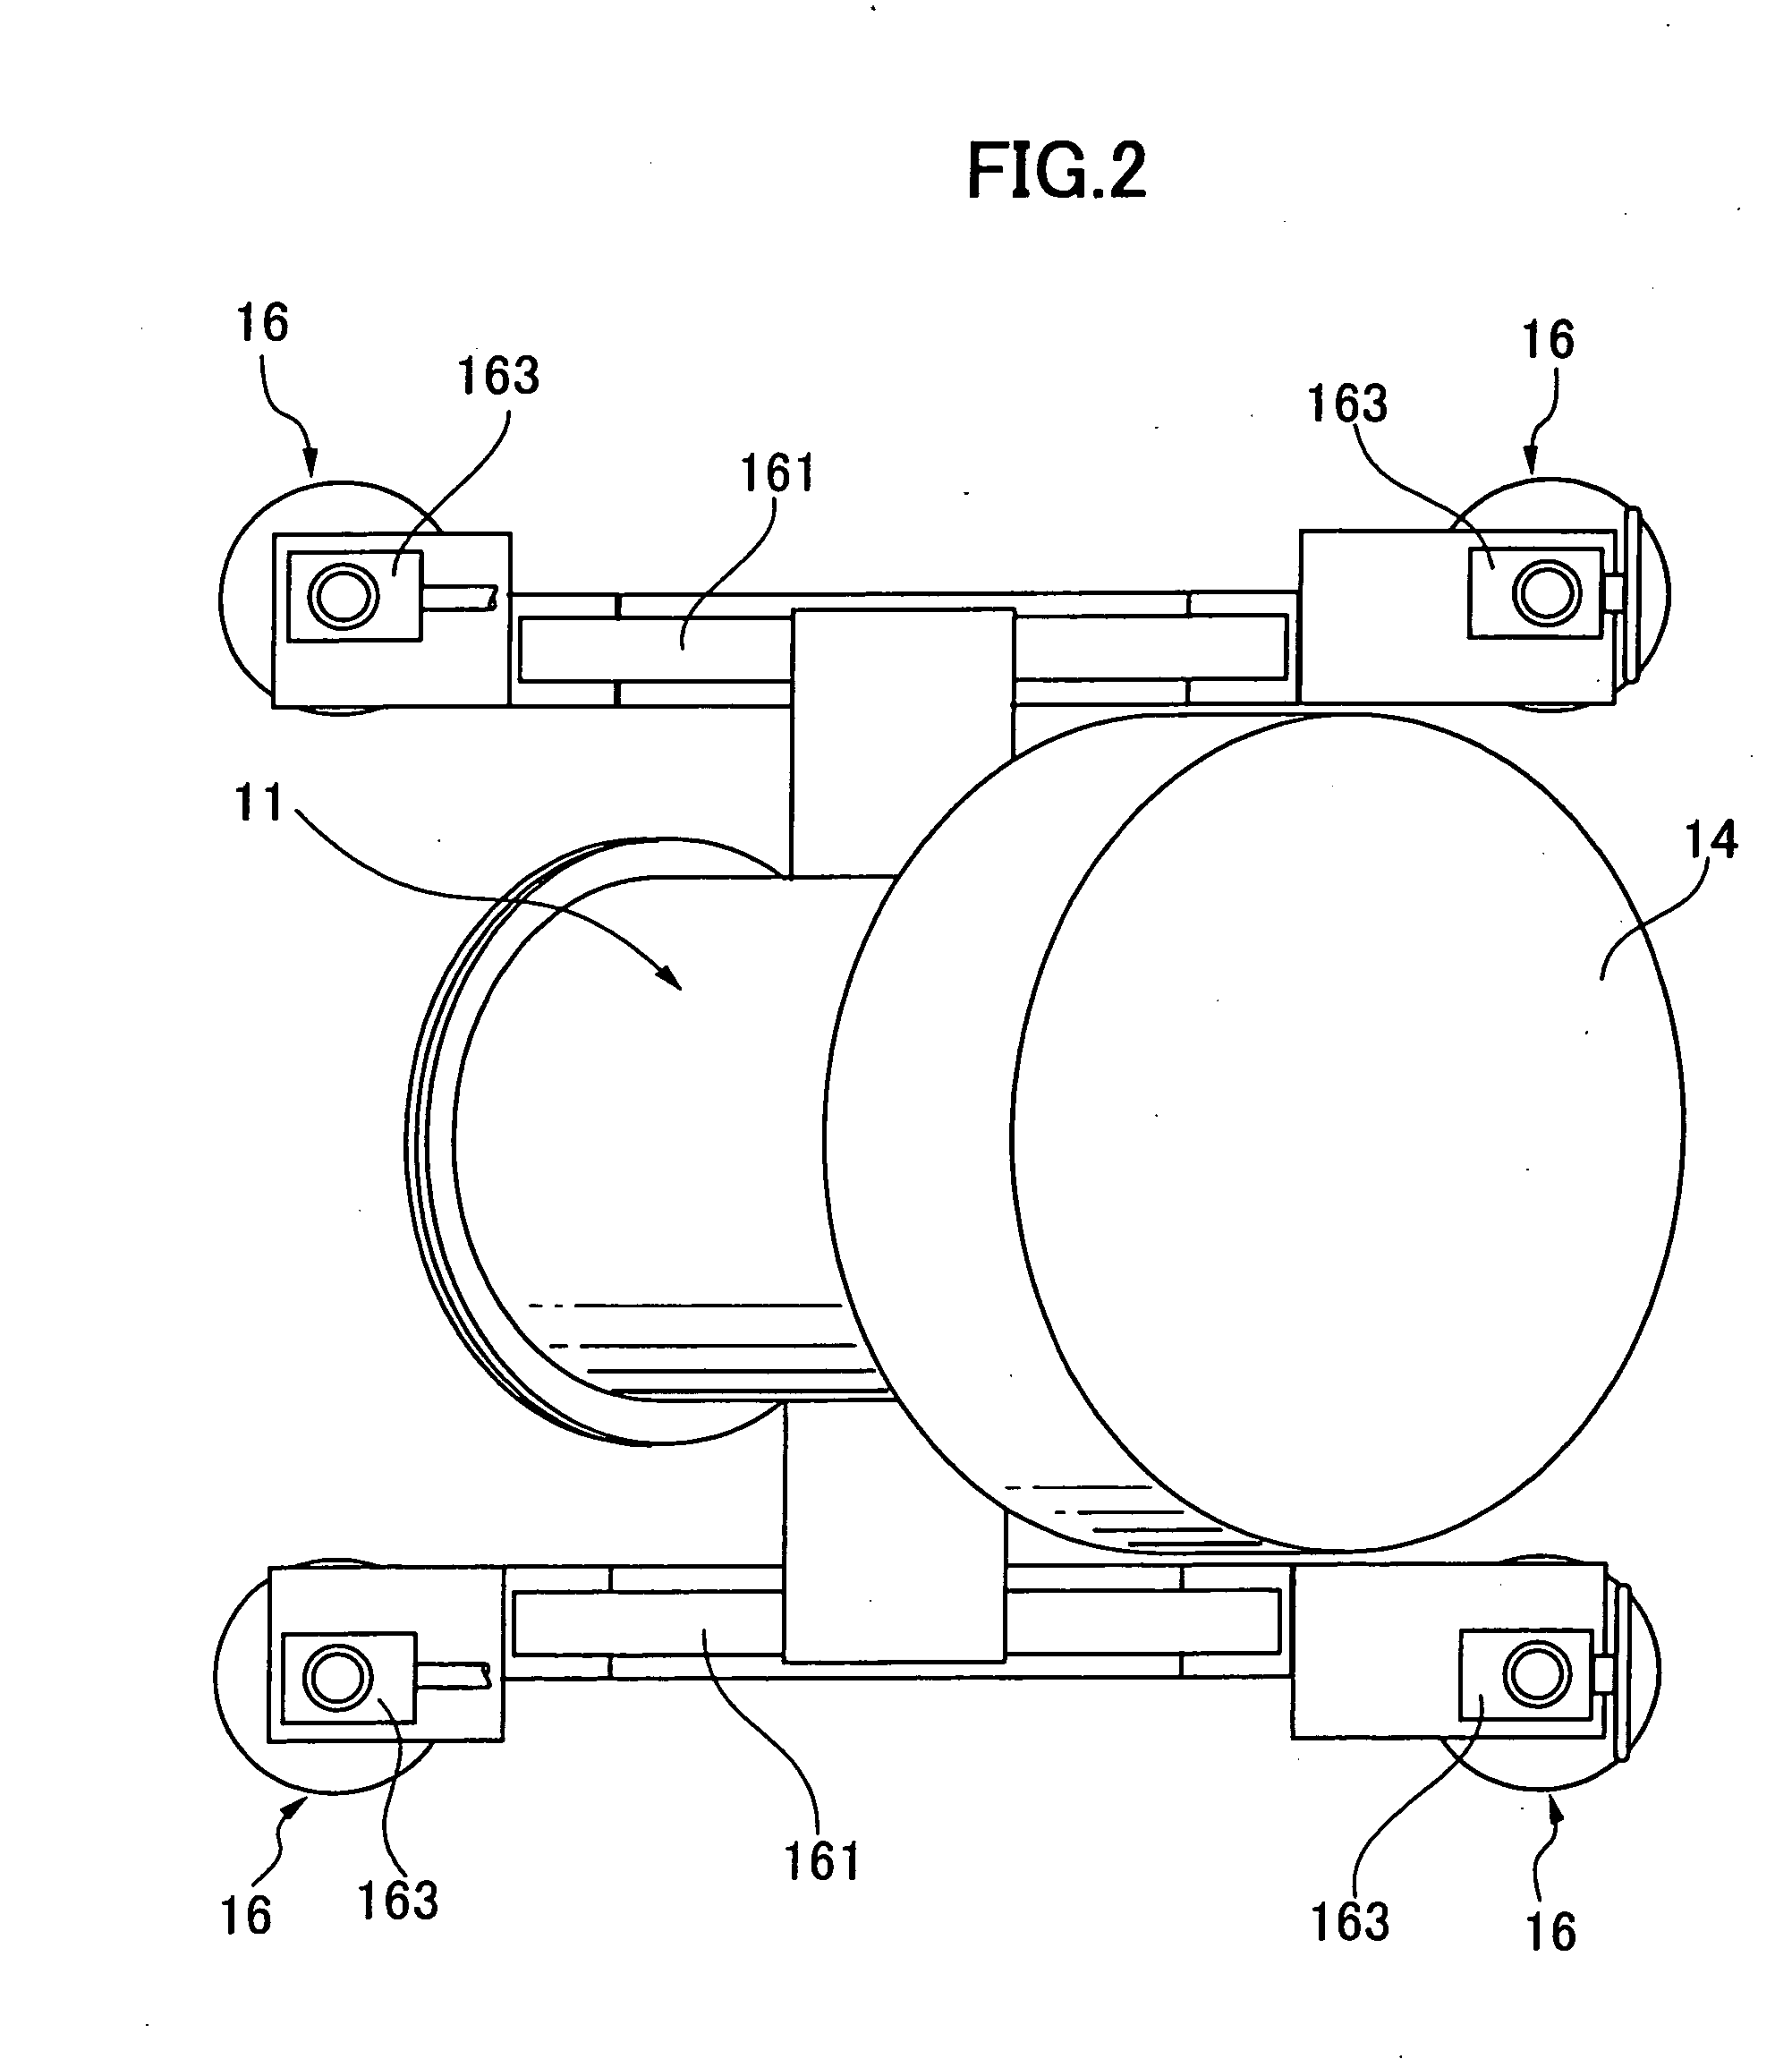 Apparatus for measuring the neuro-magnetic field from a human brain and method for operating the same